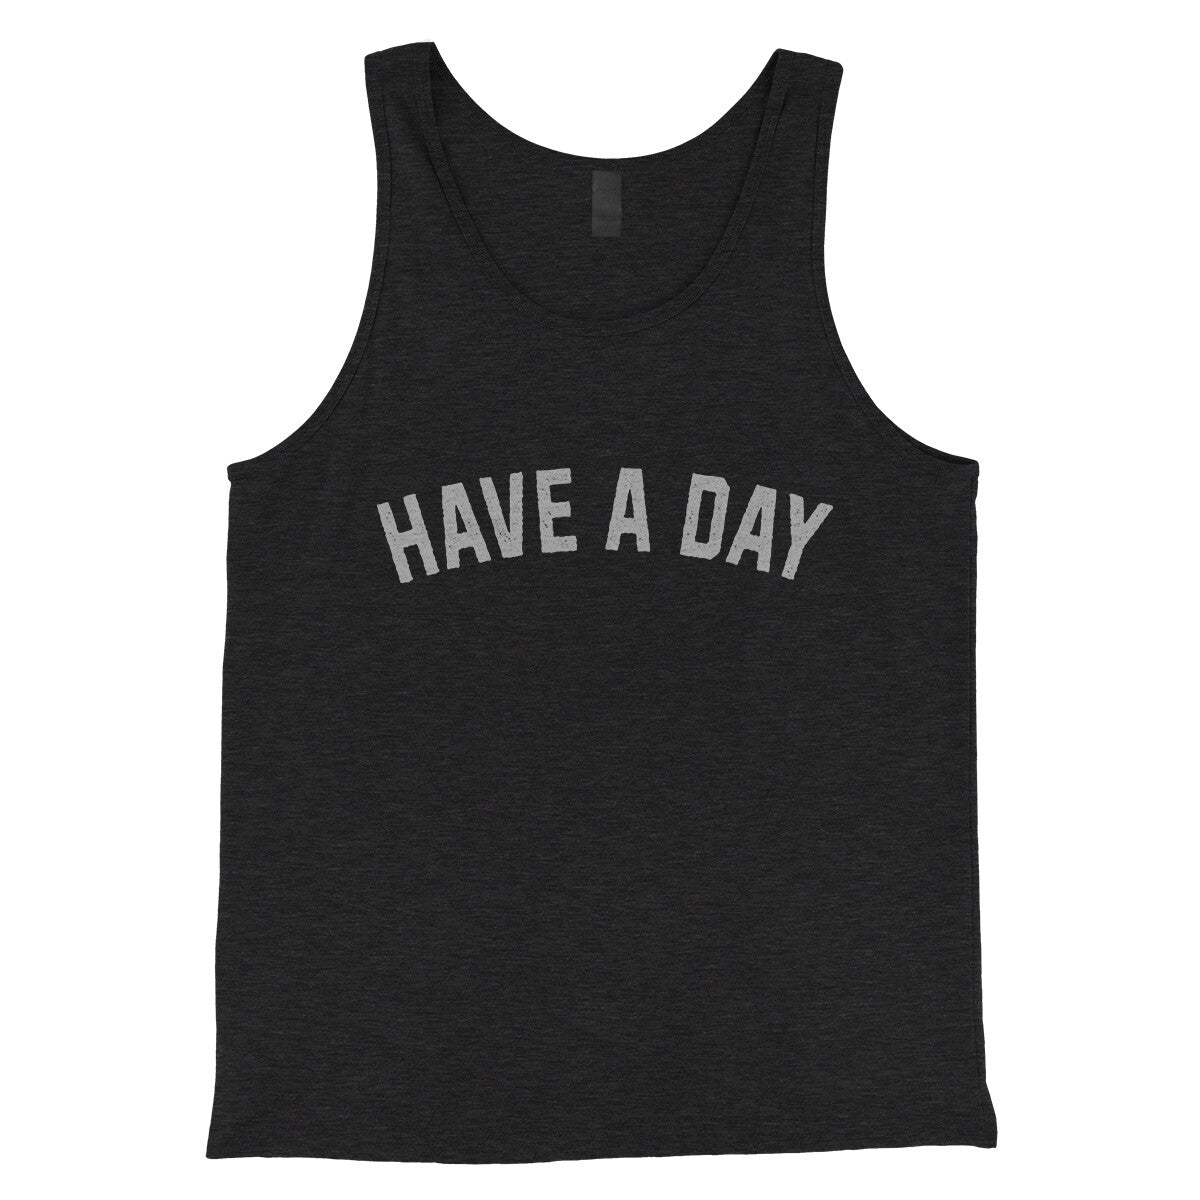 Have a Day in Charcoal Black TriBlend Color